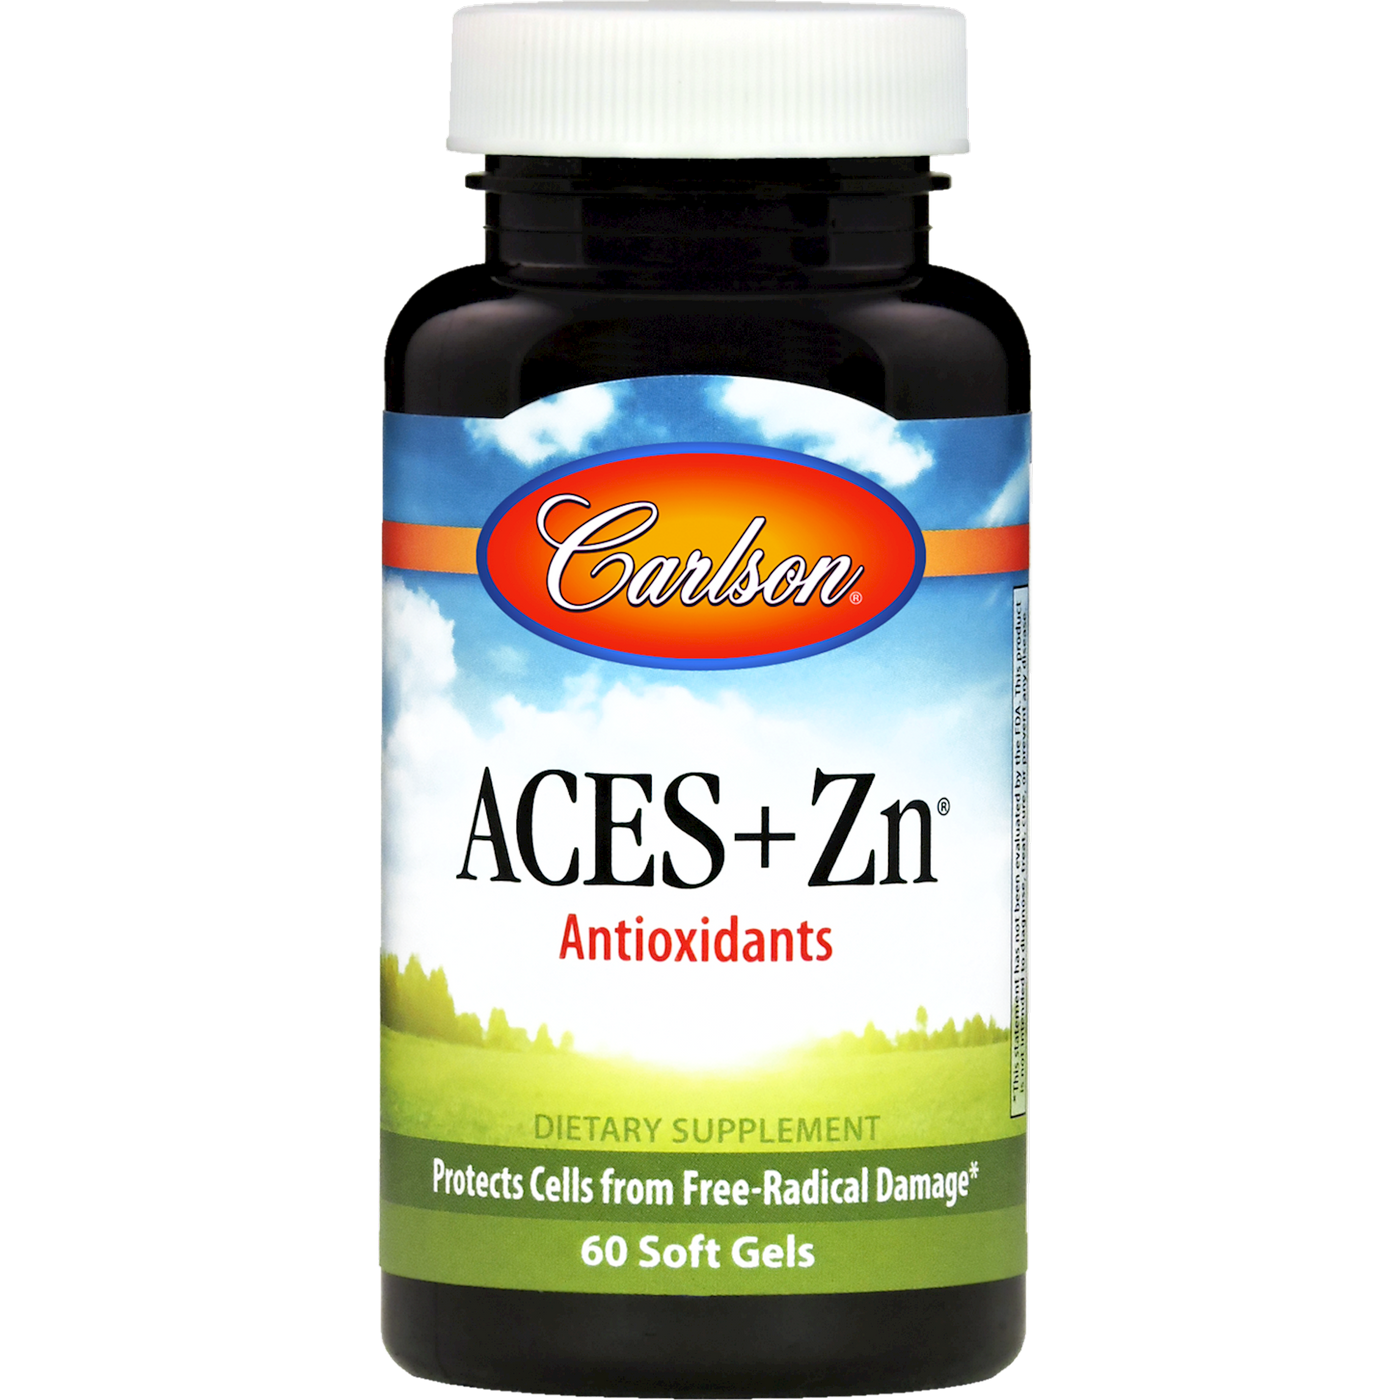 ACES + Zn 60 gels Curated Wellness